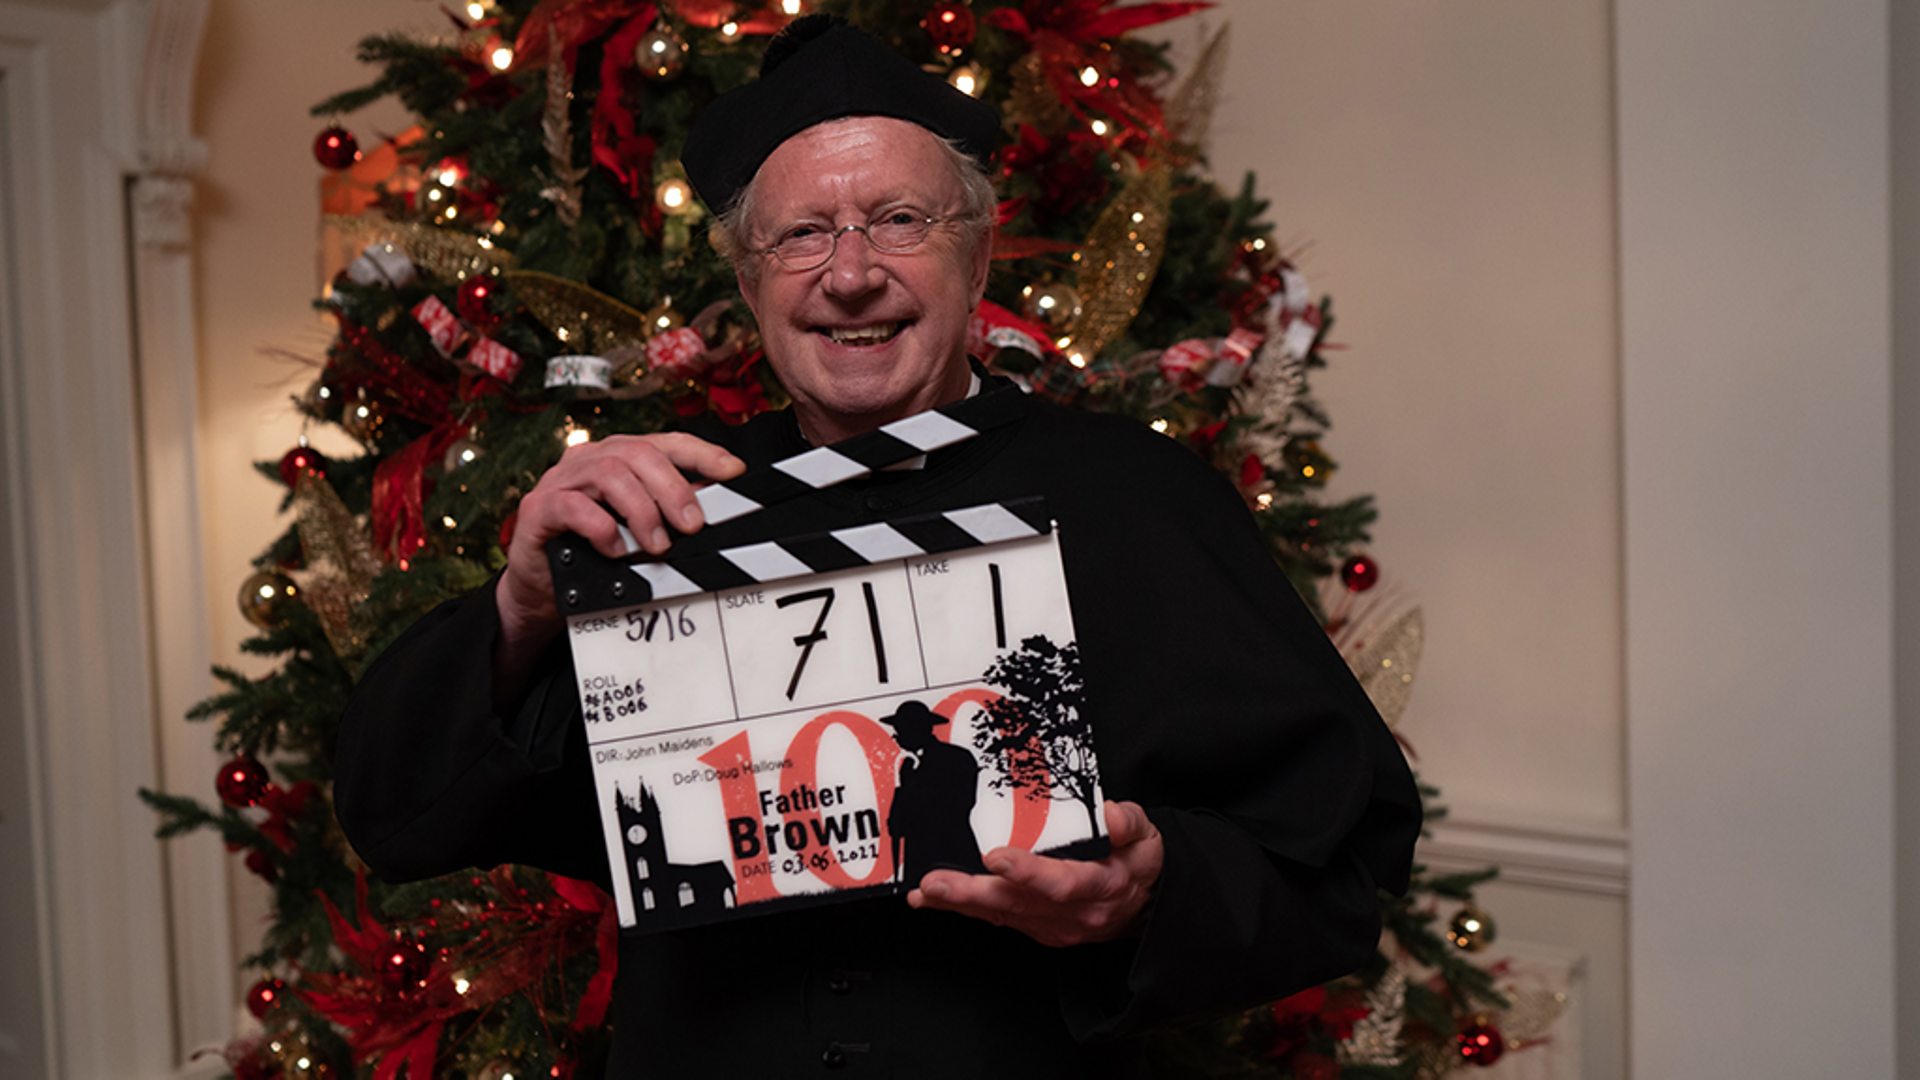 BBC daytime’s Father Brown returns to filming for the ninth series Media Centre